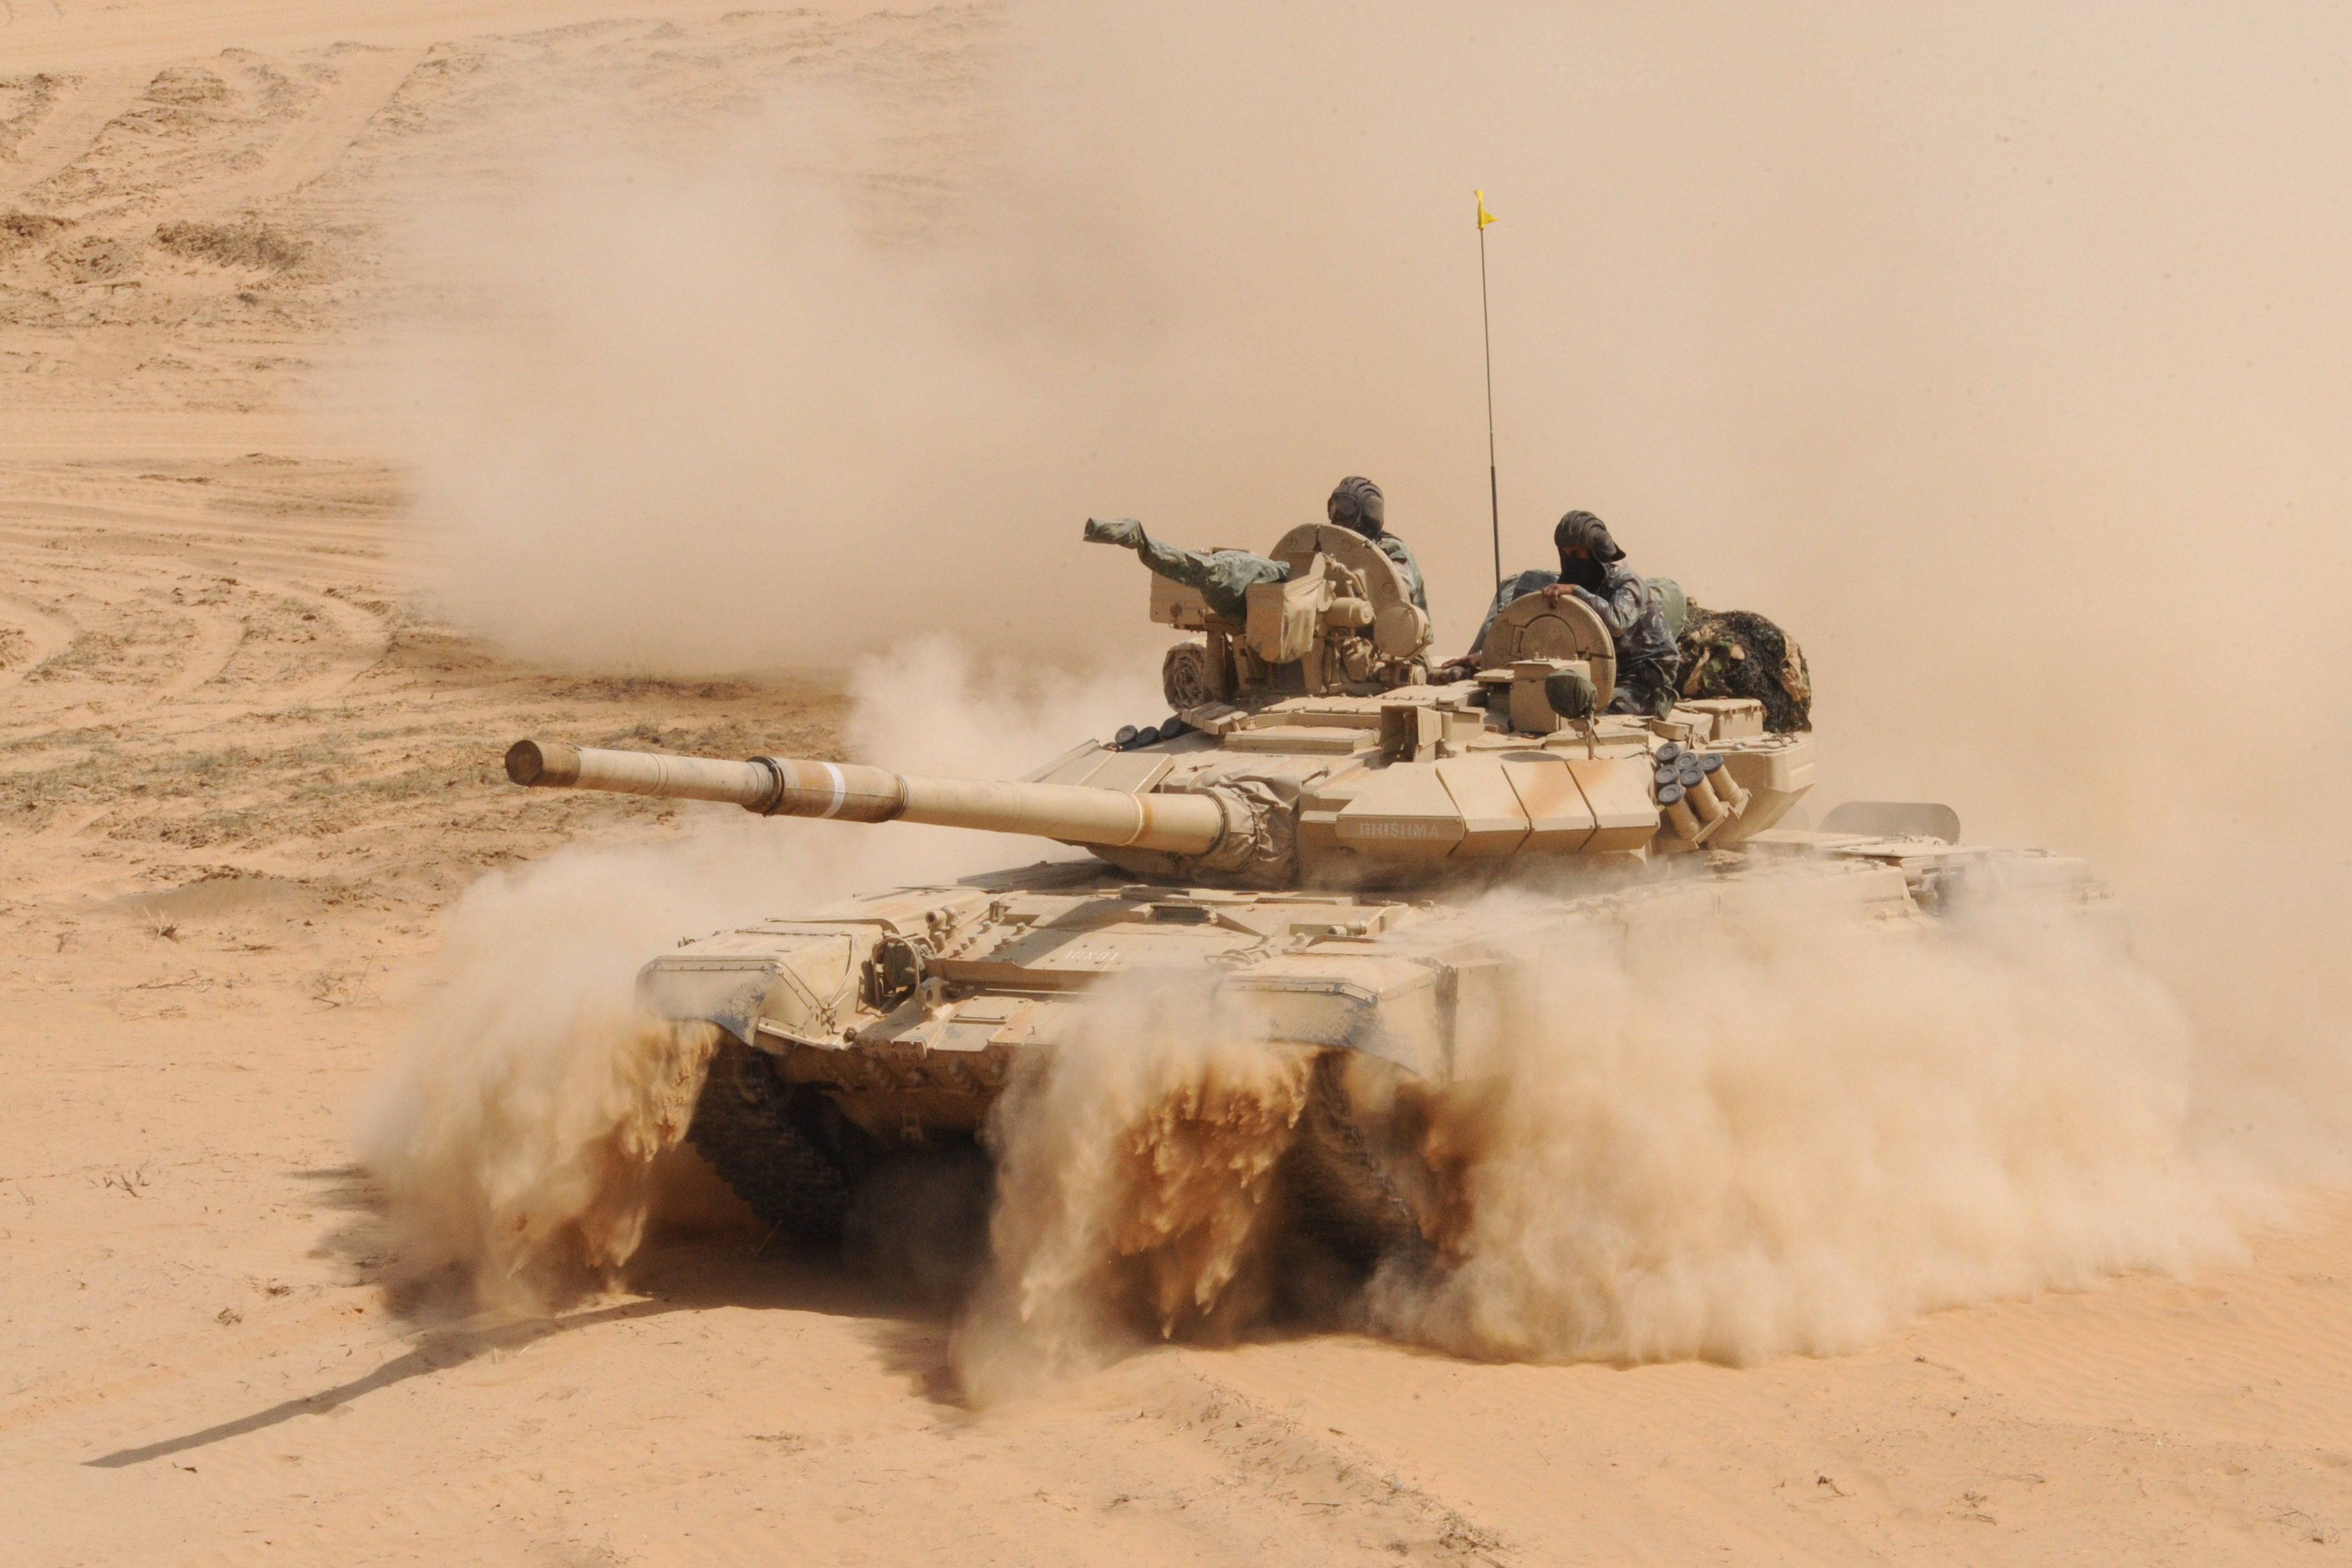 India purchased 125-mm APFSDS ammunition for its T-90S tanks. Source: AFP/East News